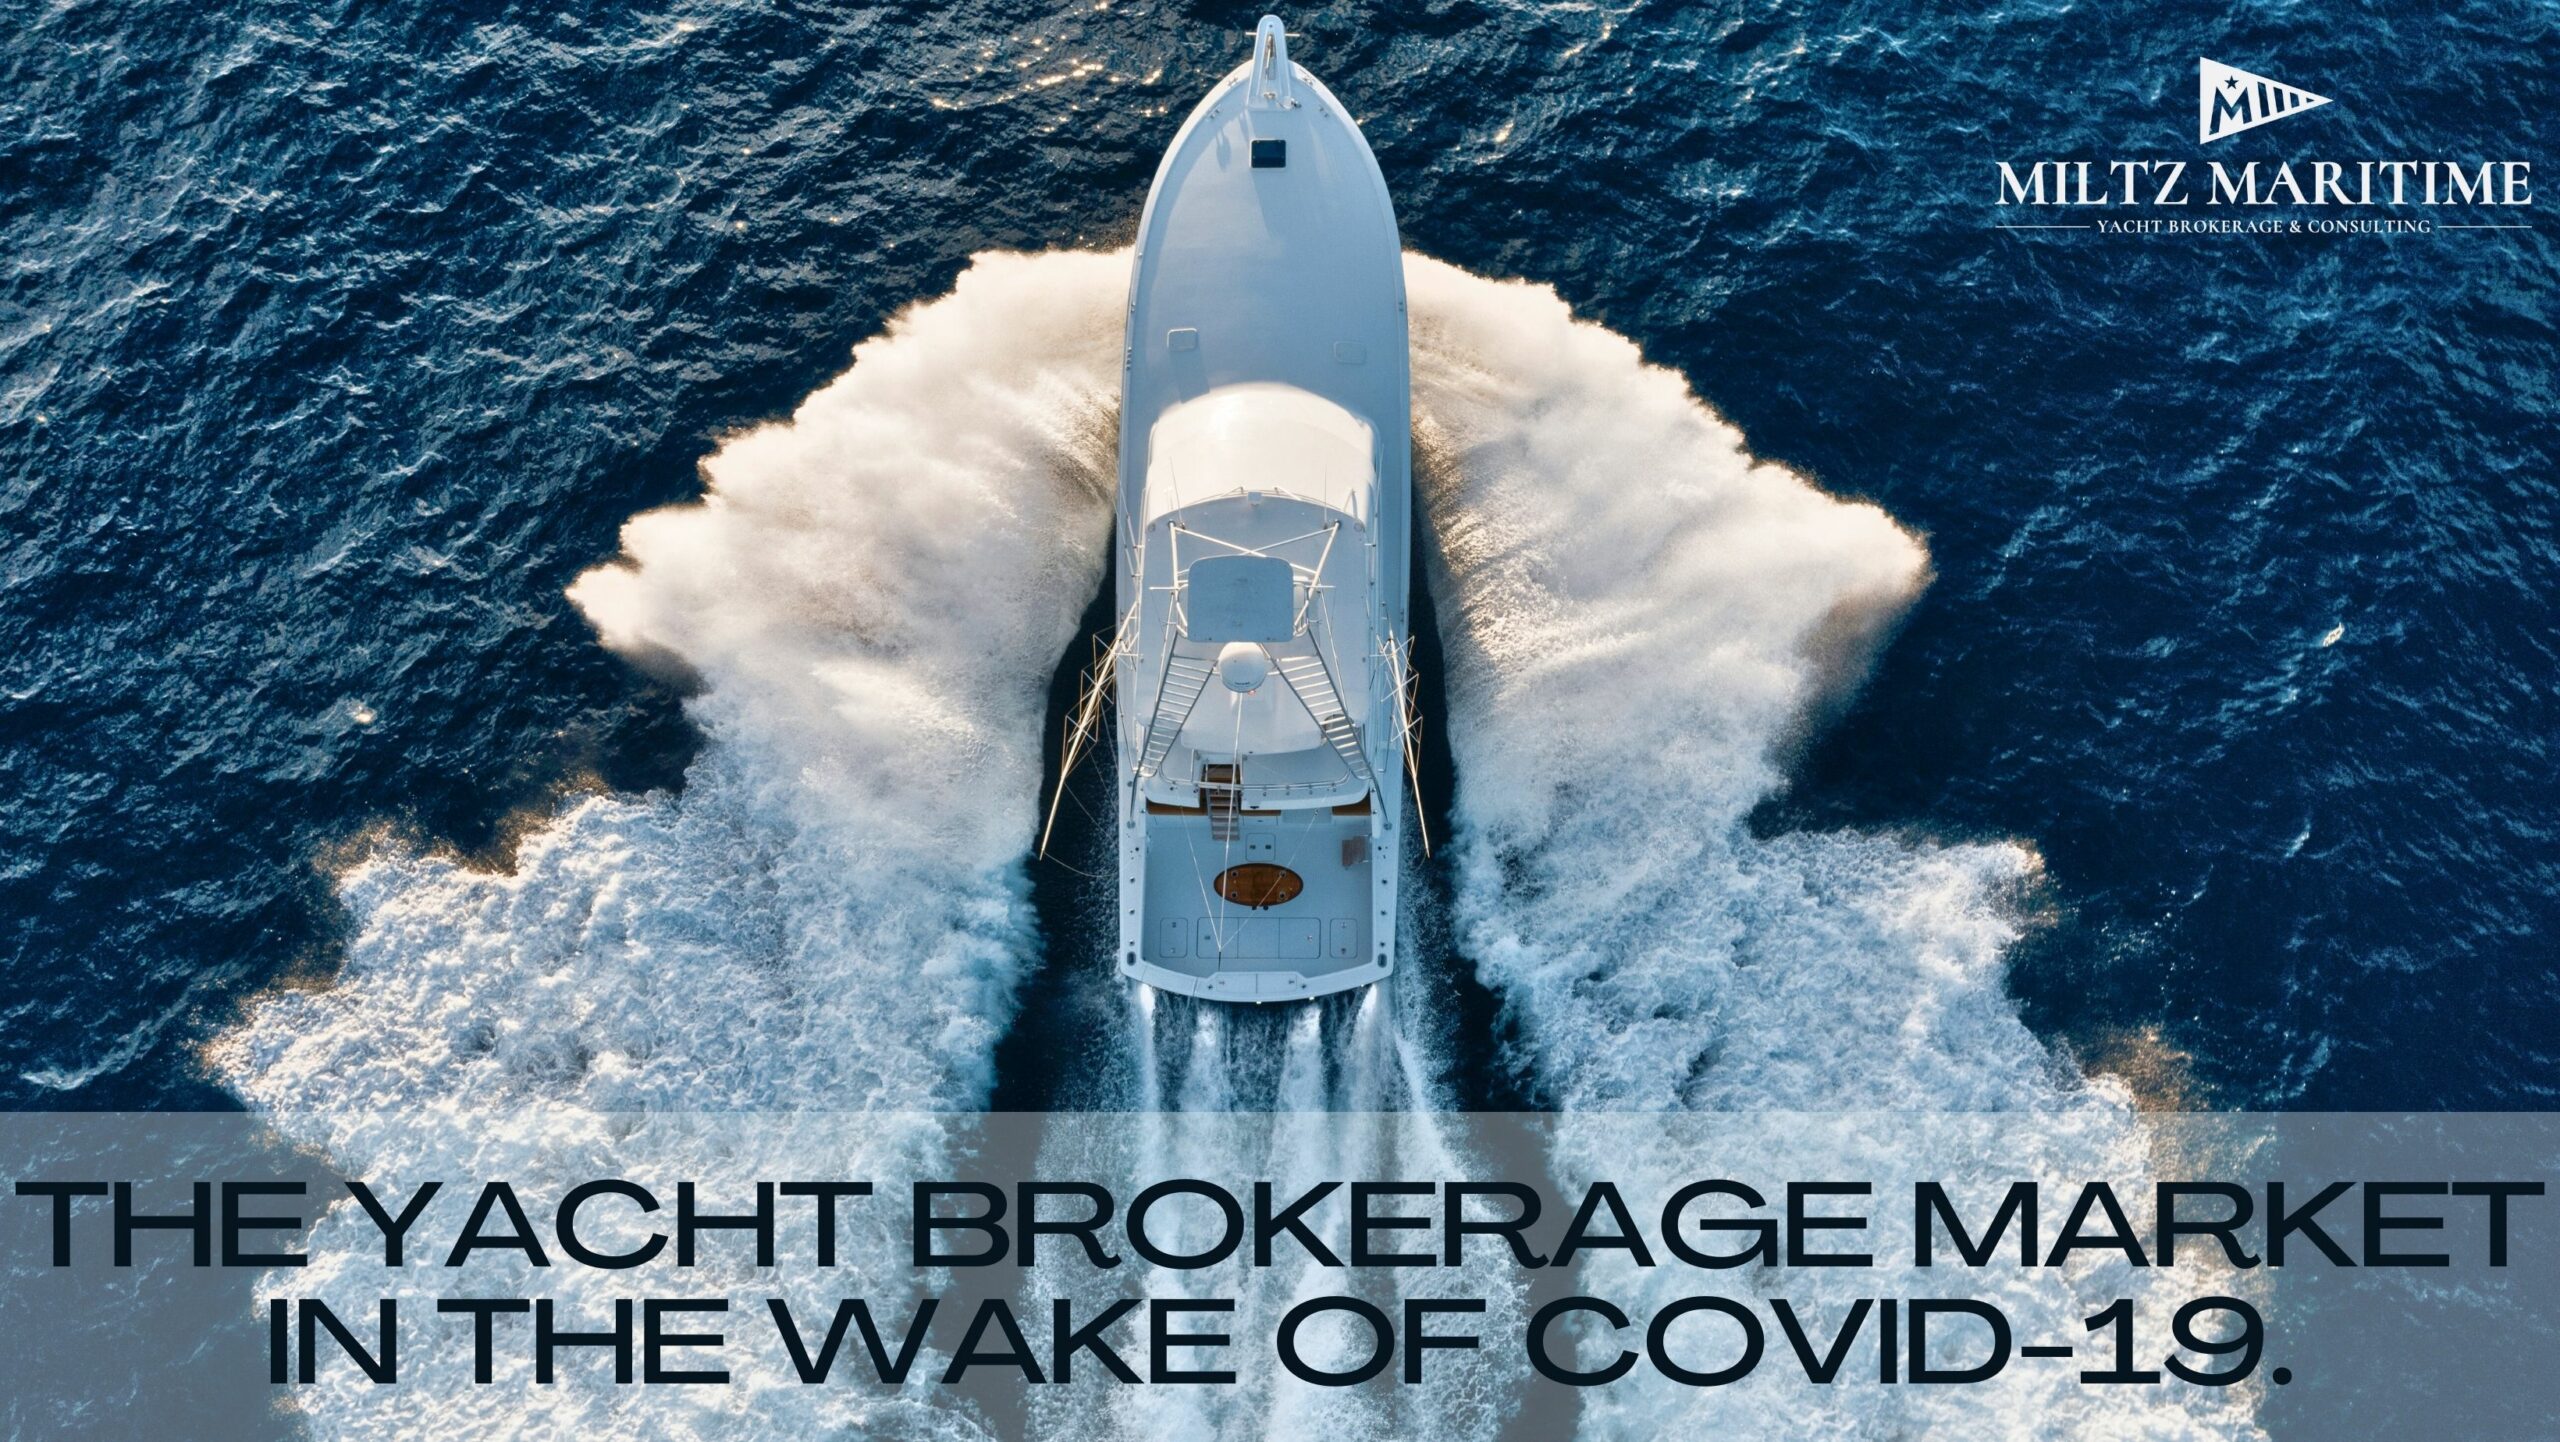 The cycles of the Yacht Brokerage Market and the effect Covid times had on it